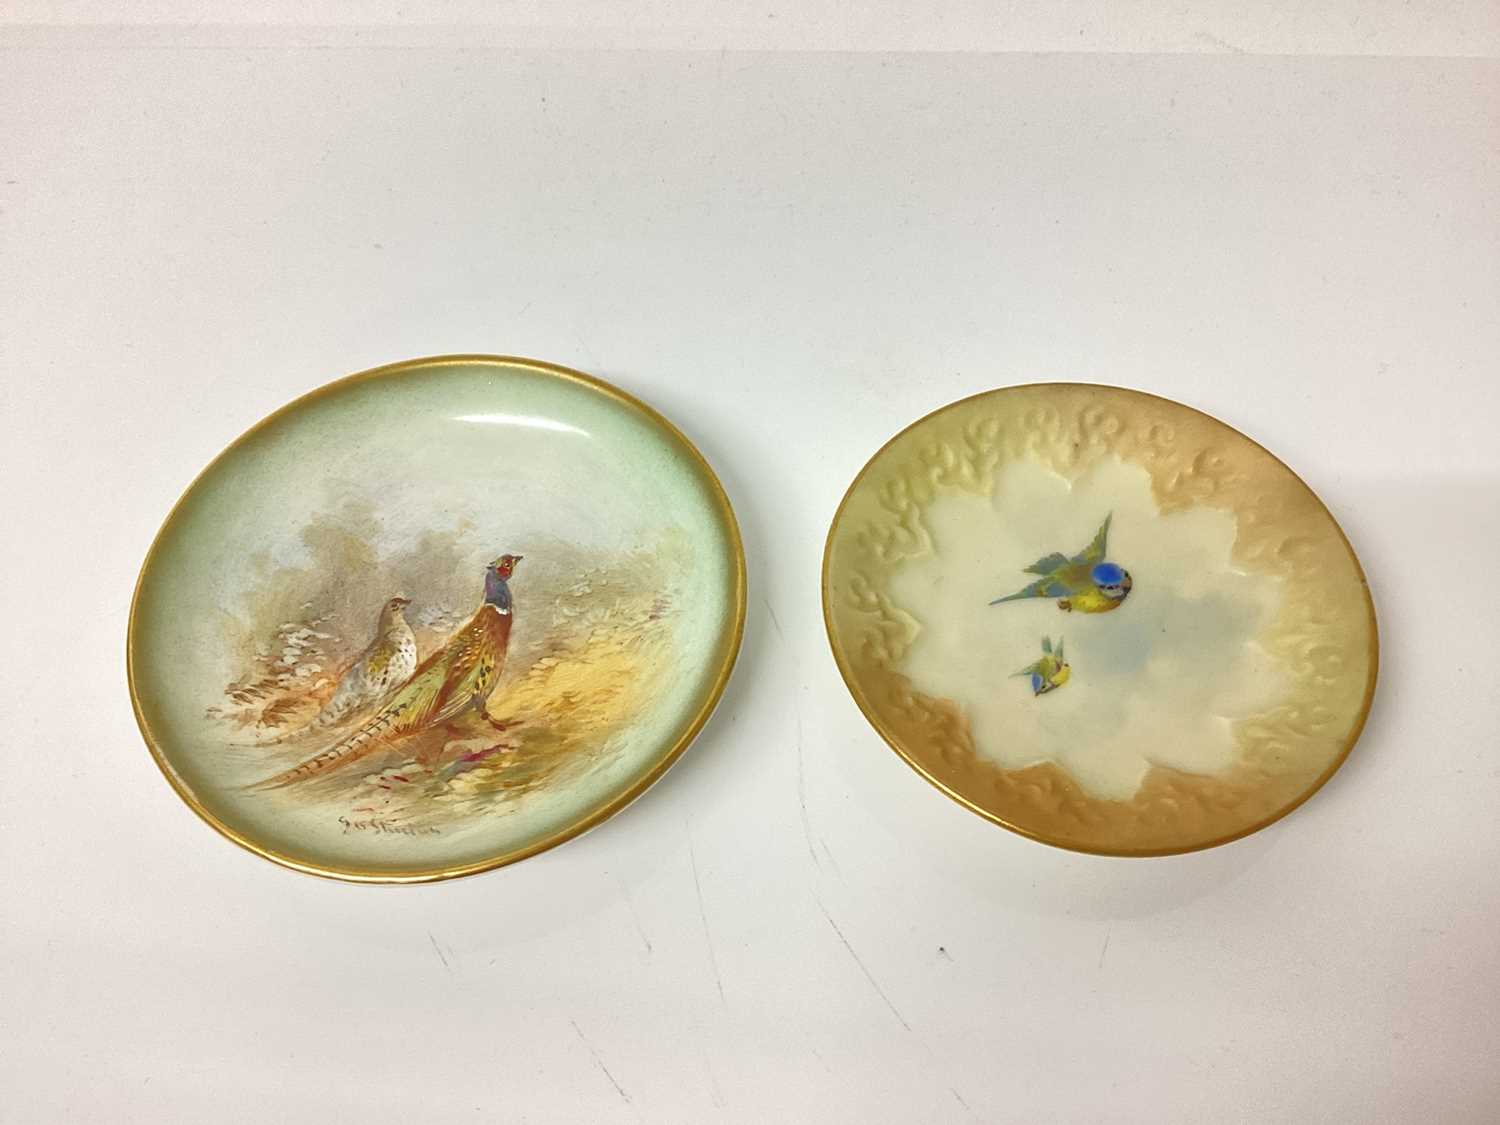 Group of Worcester porcelain to include a dish painted by Stinton (6 items)